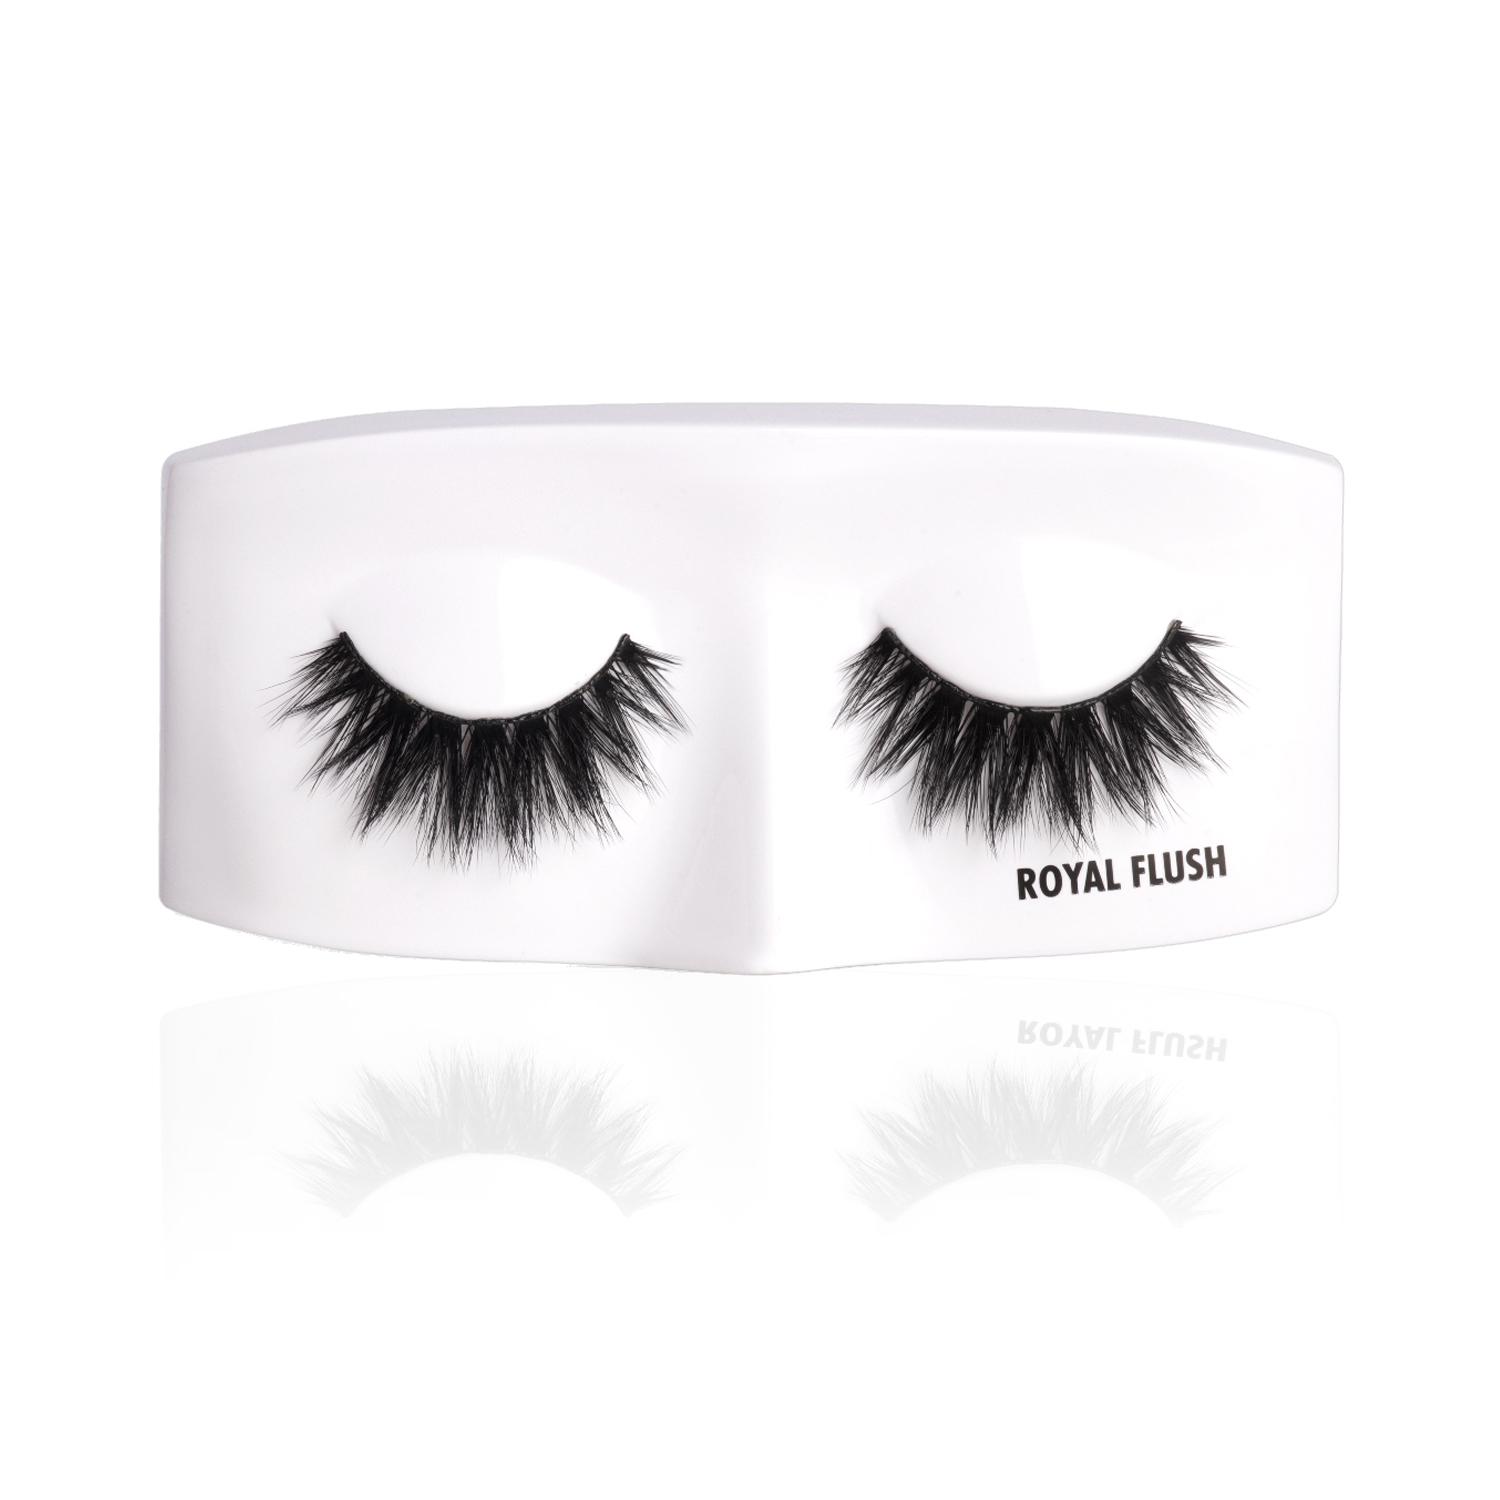 PAC | PAC Ace Of Lashes - Royal Flush (1 Pair)